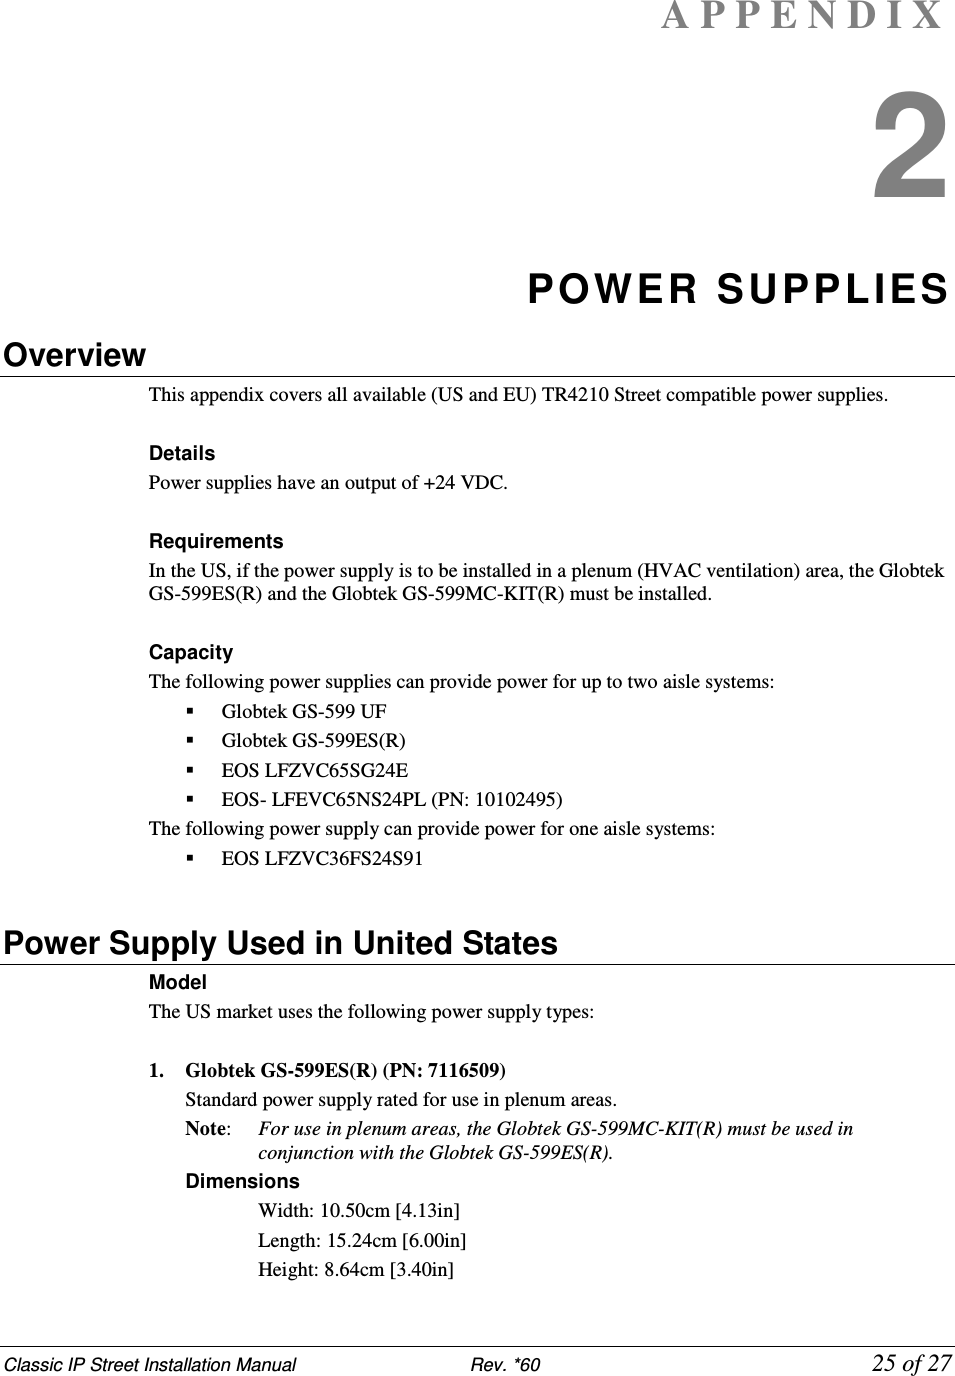 Classic IP Street Installation Manual                           Rev. *60             25 of 27 A P P E N D I X  2 POWER SUPPLIES Overview This appendix covers all available (US and EU) TR4210 Street compatible power supplies.  Details Power supplies have an output of +24 VDC.  Requirements In the US, if the power supply is to be installed in a plenum (HVAC ventilation) area, the Globtek GS-599ES(R) and the Globtek GS-599MC-KIT(R) must be installed.  Capacity The following power supplies can provide power for up to two aisle systems:  Globtek GS-599 UF  Globtek GS-599ES(R)  EOS LFZVC65SG24E  EOS- LFEVC65NS24PL (PN: 10102495) The following power supply can provide power for one aisle systems:  EOS LFZVC36FS24S91  Power Supply Used in United States Model  The US market uses the following power supply types:  1. Globtek GS-599ES(R) (PN: 7116509) Standard power supply rated for use in plenum areas.  Note:   For use in plenum areas, the Globtek GS-599MC-KIT(R) must be used in conjunction with the Globtek GS-599ES(R).  Dimensions  Width: 10.50cm [4.13in]  Length: 15.24cm [6.00in]  Height: 8.64cm [3.40in] 